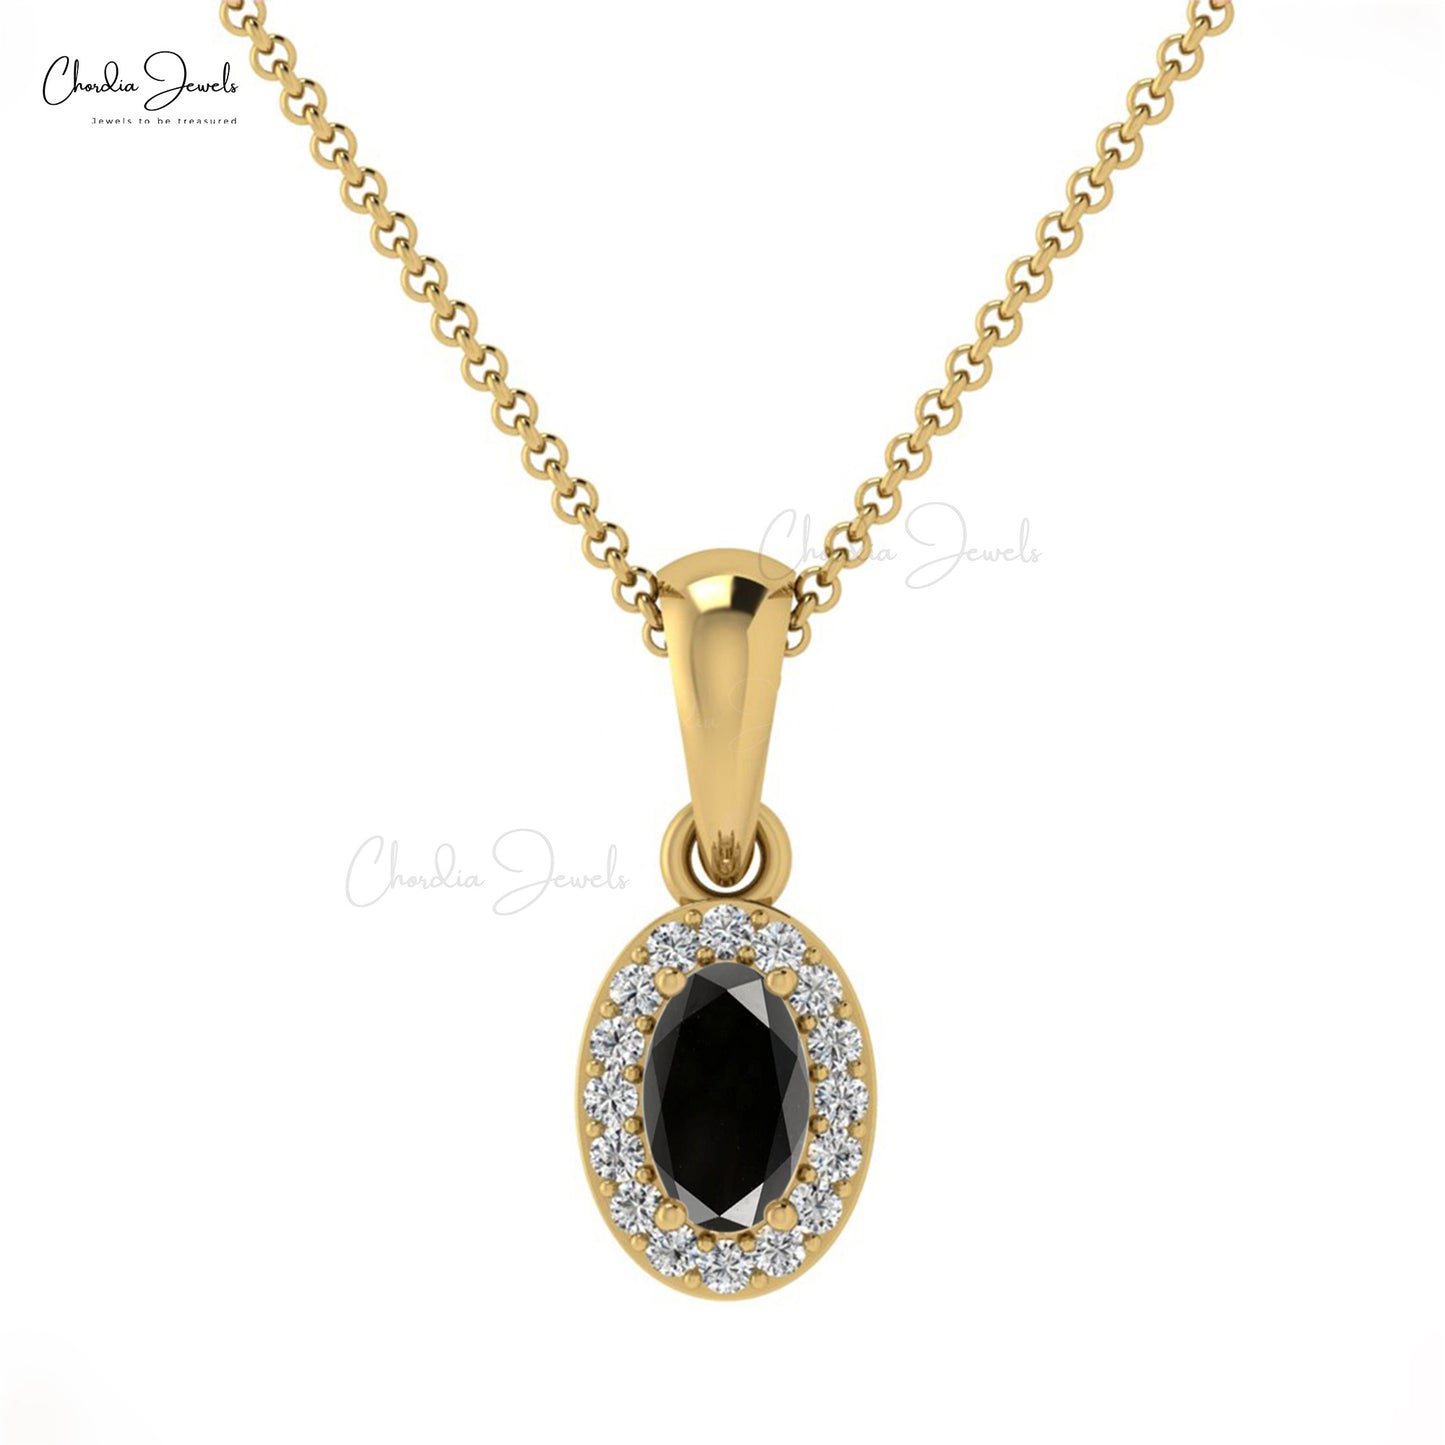 Beautiful High Quality 14k Solid Gold White Diamond Pendant Necklace 5x3mm Oval Shape Genuine Black Diamond Pendant Valentine's Day Gift For Love Ones